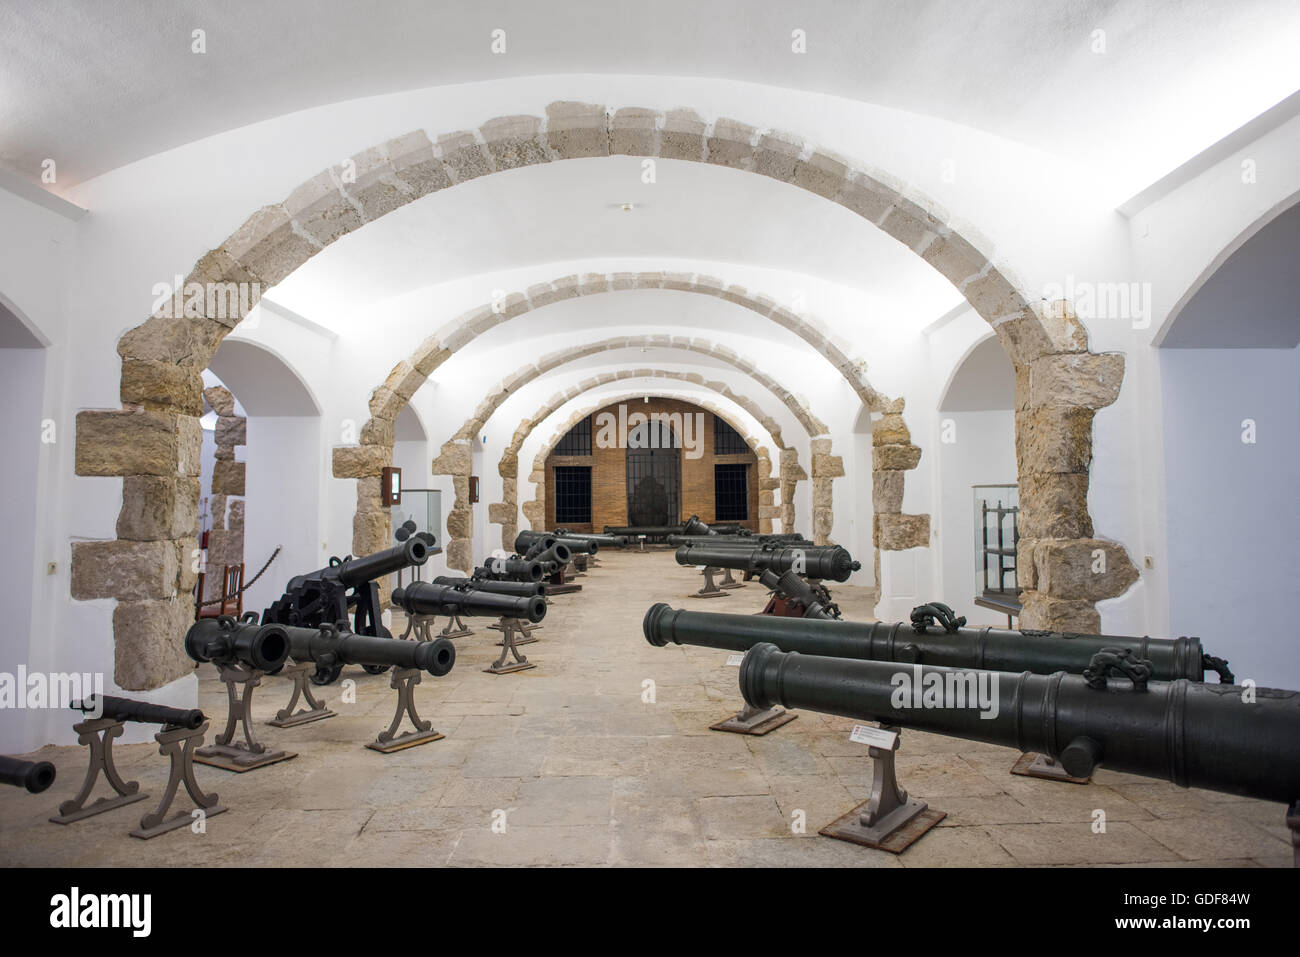 LISBON, Portugal - Housed in the old armoury, Lisbon's Military Museum showcases 500 years of Portuguese military history, with many of the exhibits in opulently decorated rooms of the historic building. Stock Photo